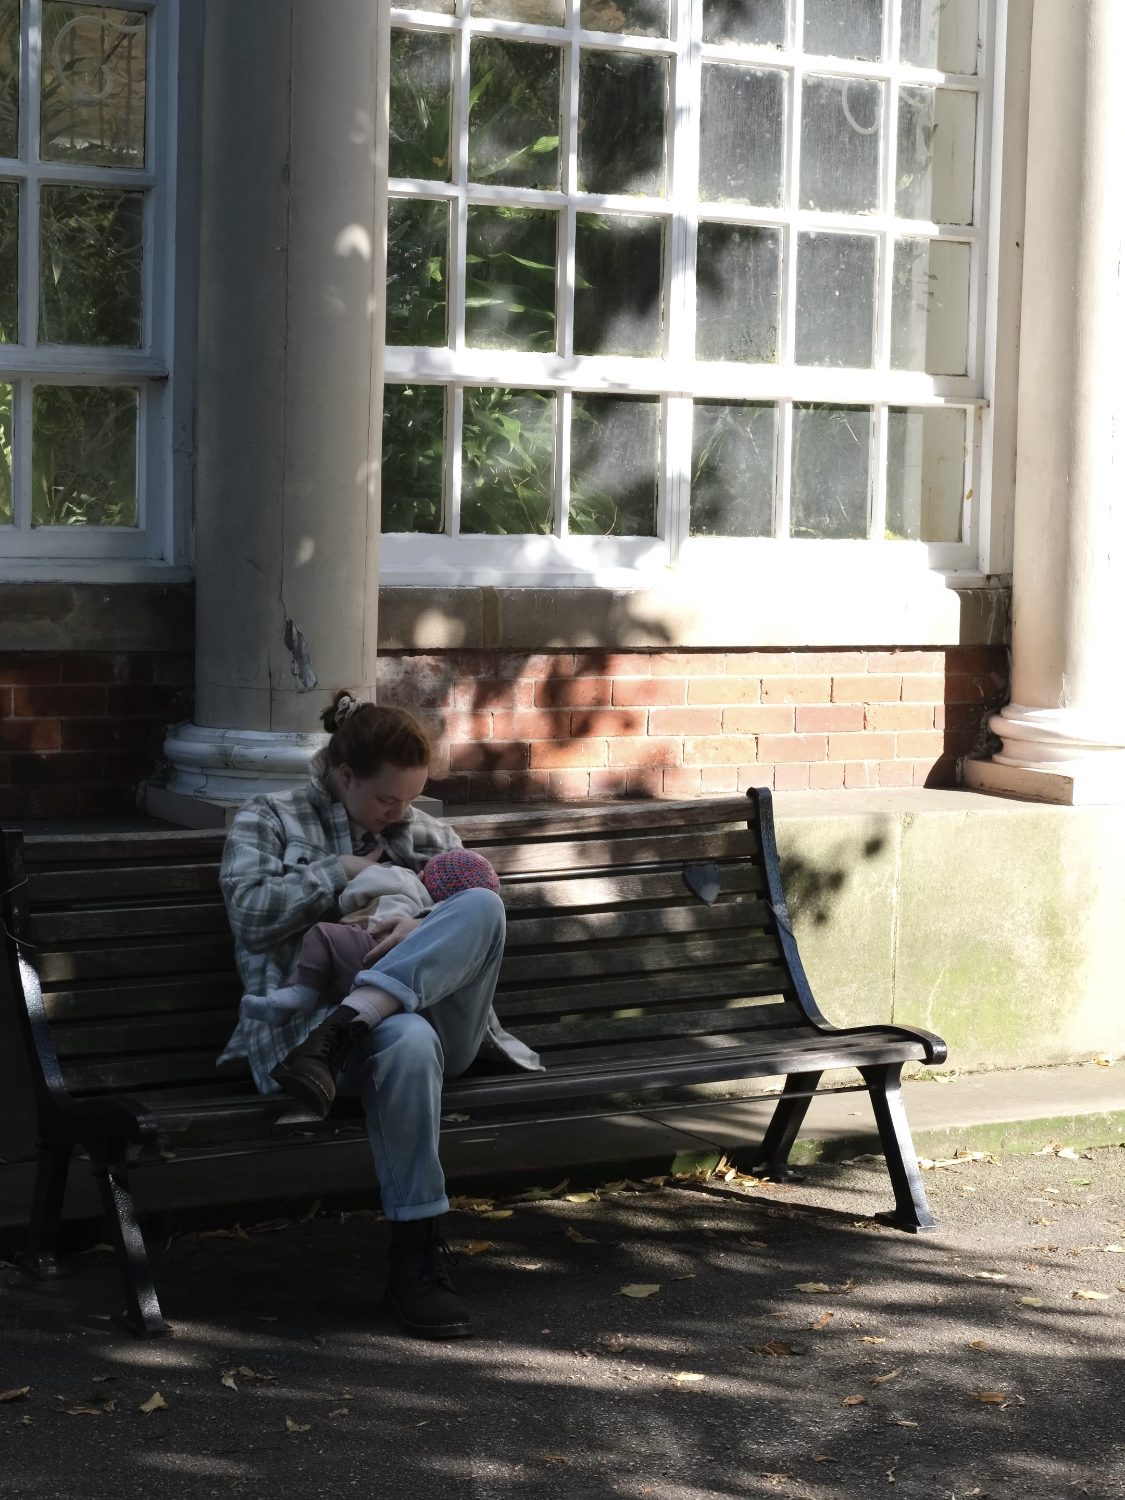 Alice breastfeeding her baby outside on a bench